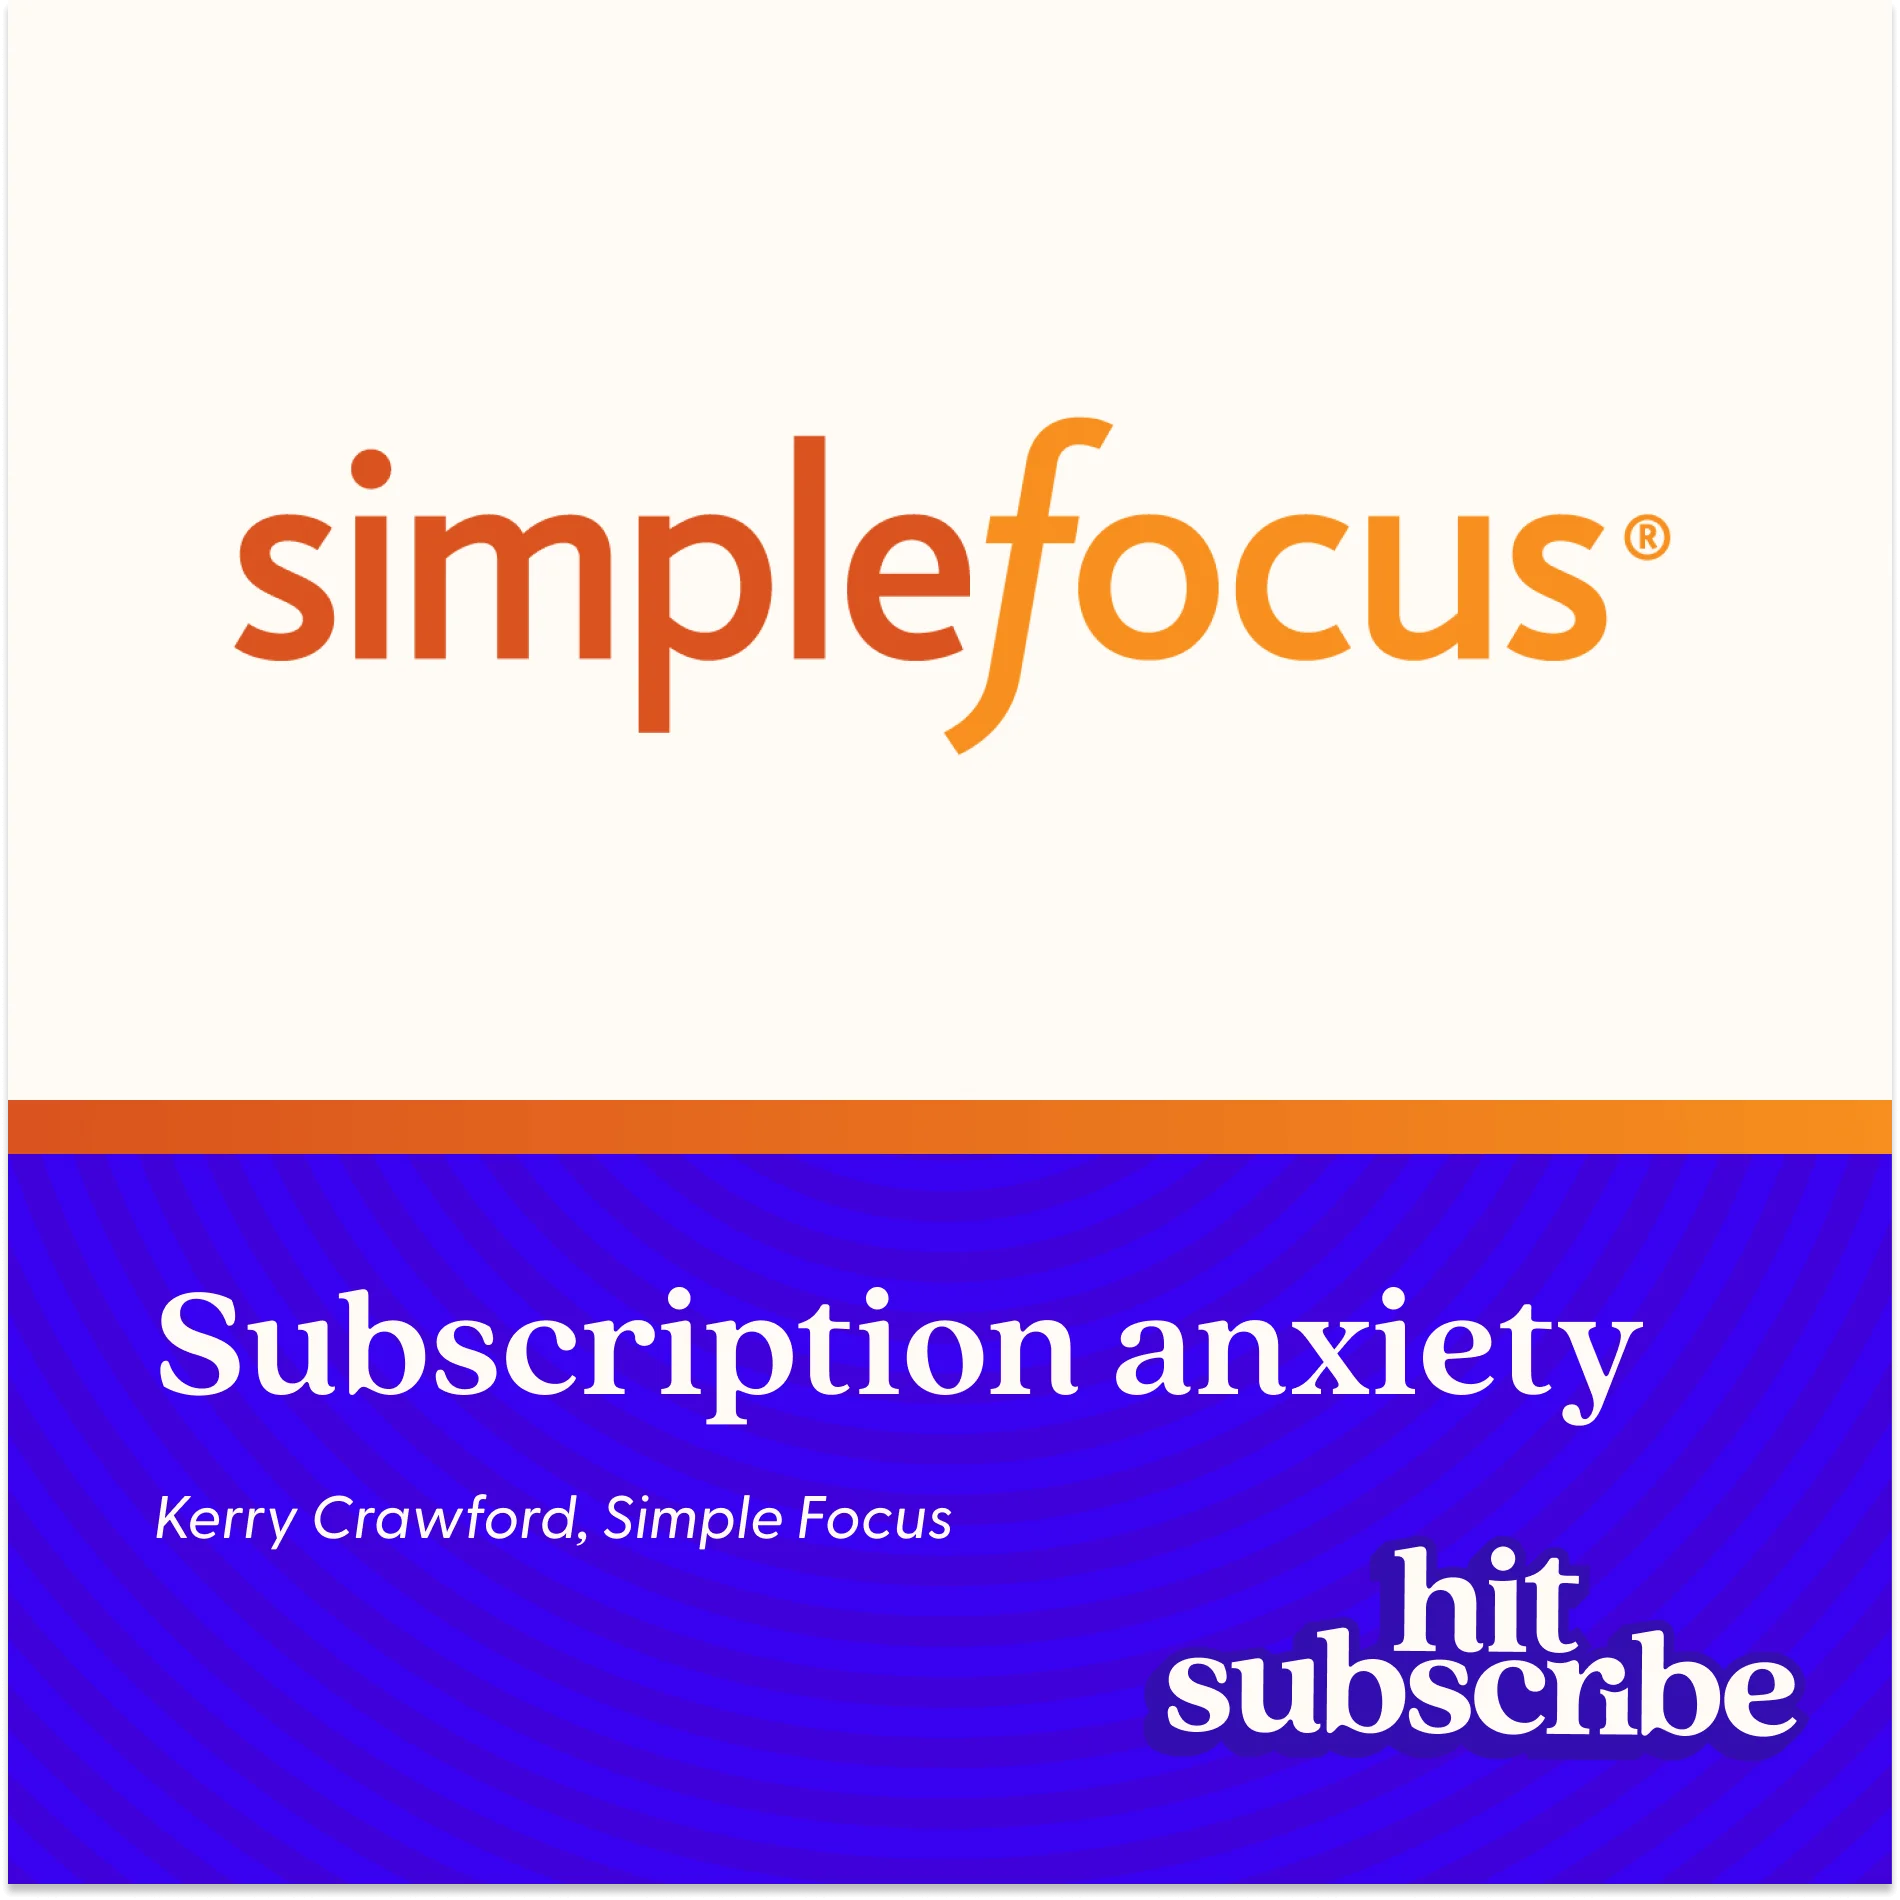 Hit Subscribe podcast episode cover featuring Kerry Crawford, Director of Research & Strategy, Simple Focus